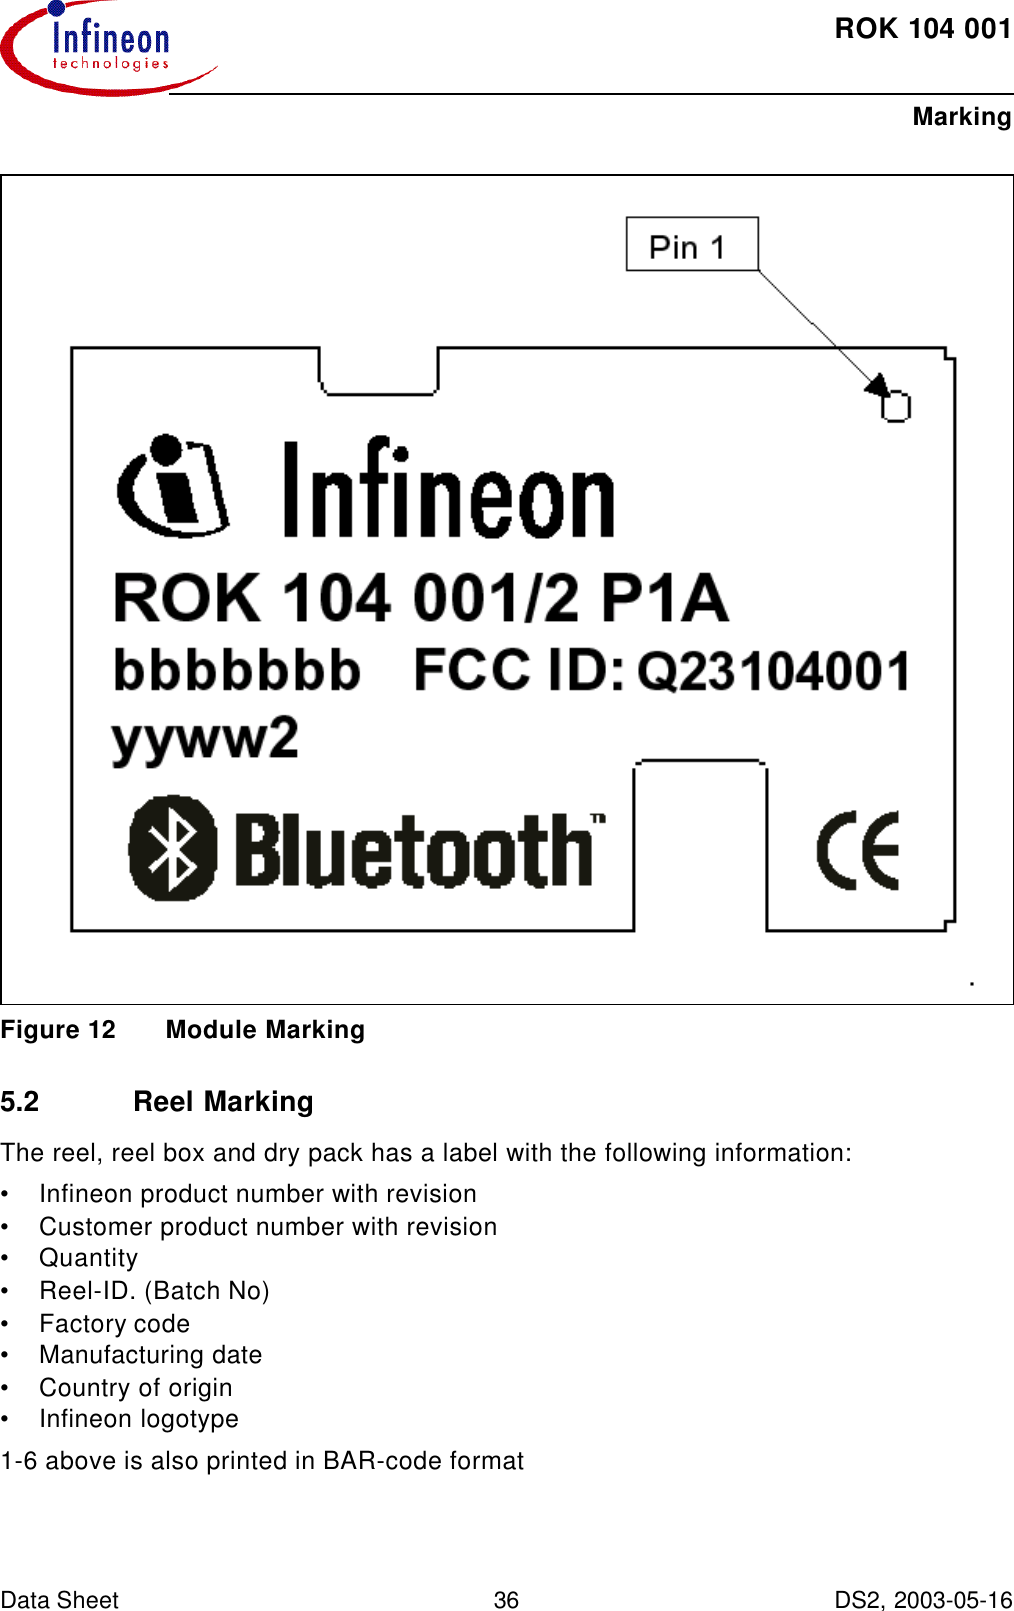 ROK104001MarkingData Sheet 36 DS2, 2003-05-16   Figure12 Module Marking5.2 Reel MarkingThe reel, reel box and dry pack has a label with the following information:•Infineon product number with revision•Customer product number with revision•Quantity•Reel-ID. (Batch No)•Factory code•Manufacturing date•Country of origin•Infineon logotype1-6 above is also printed in BAR-code format